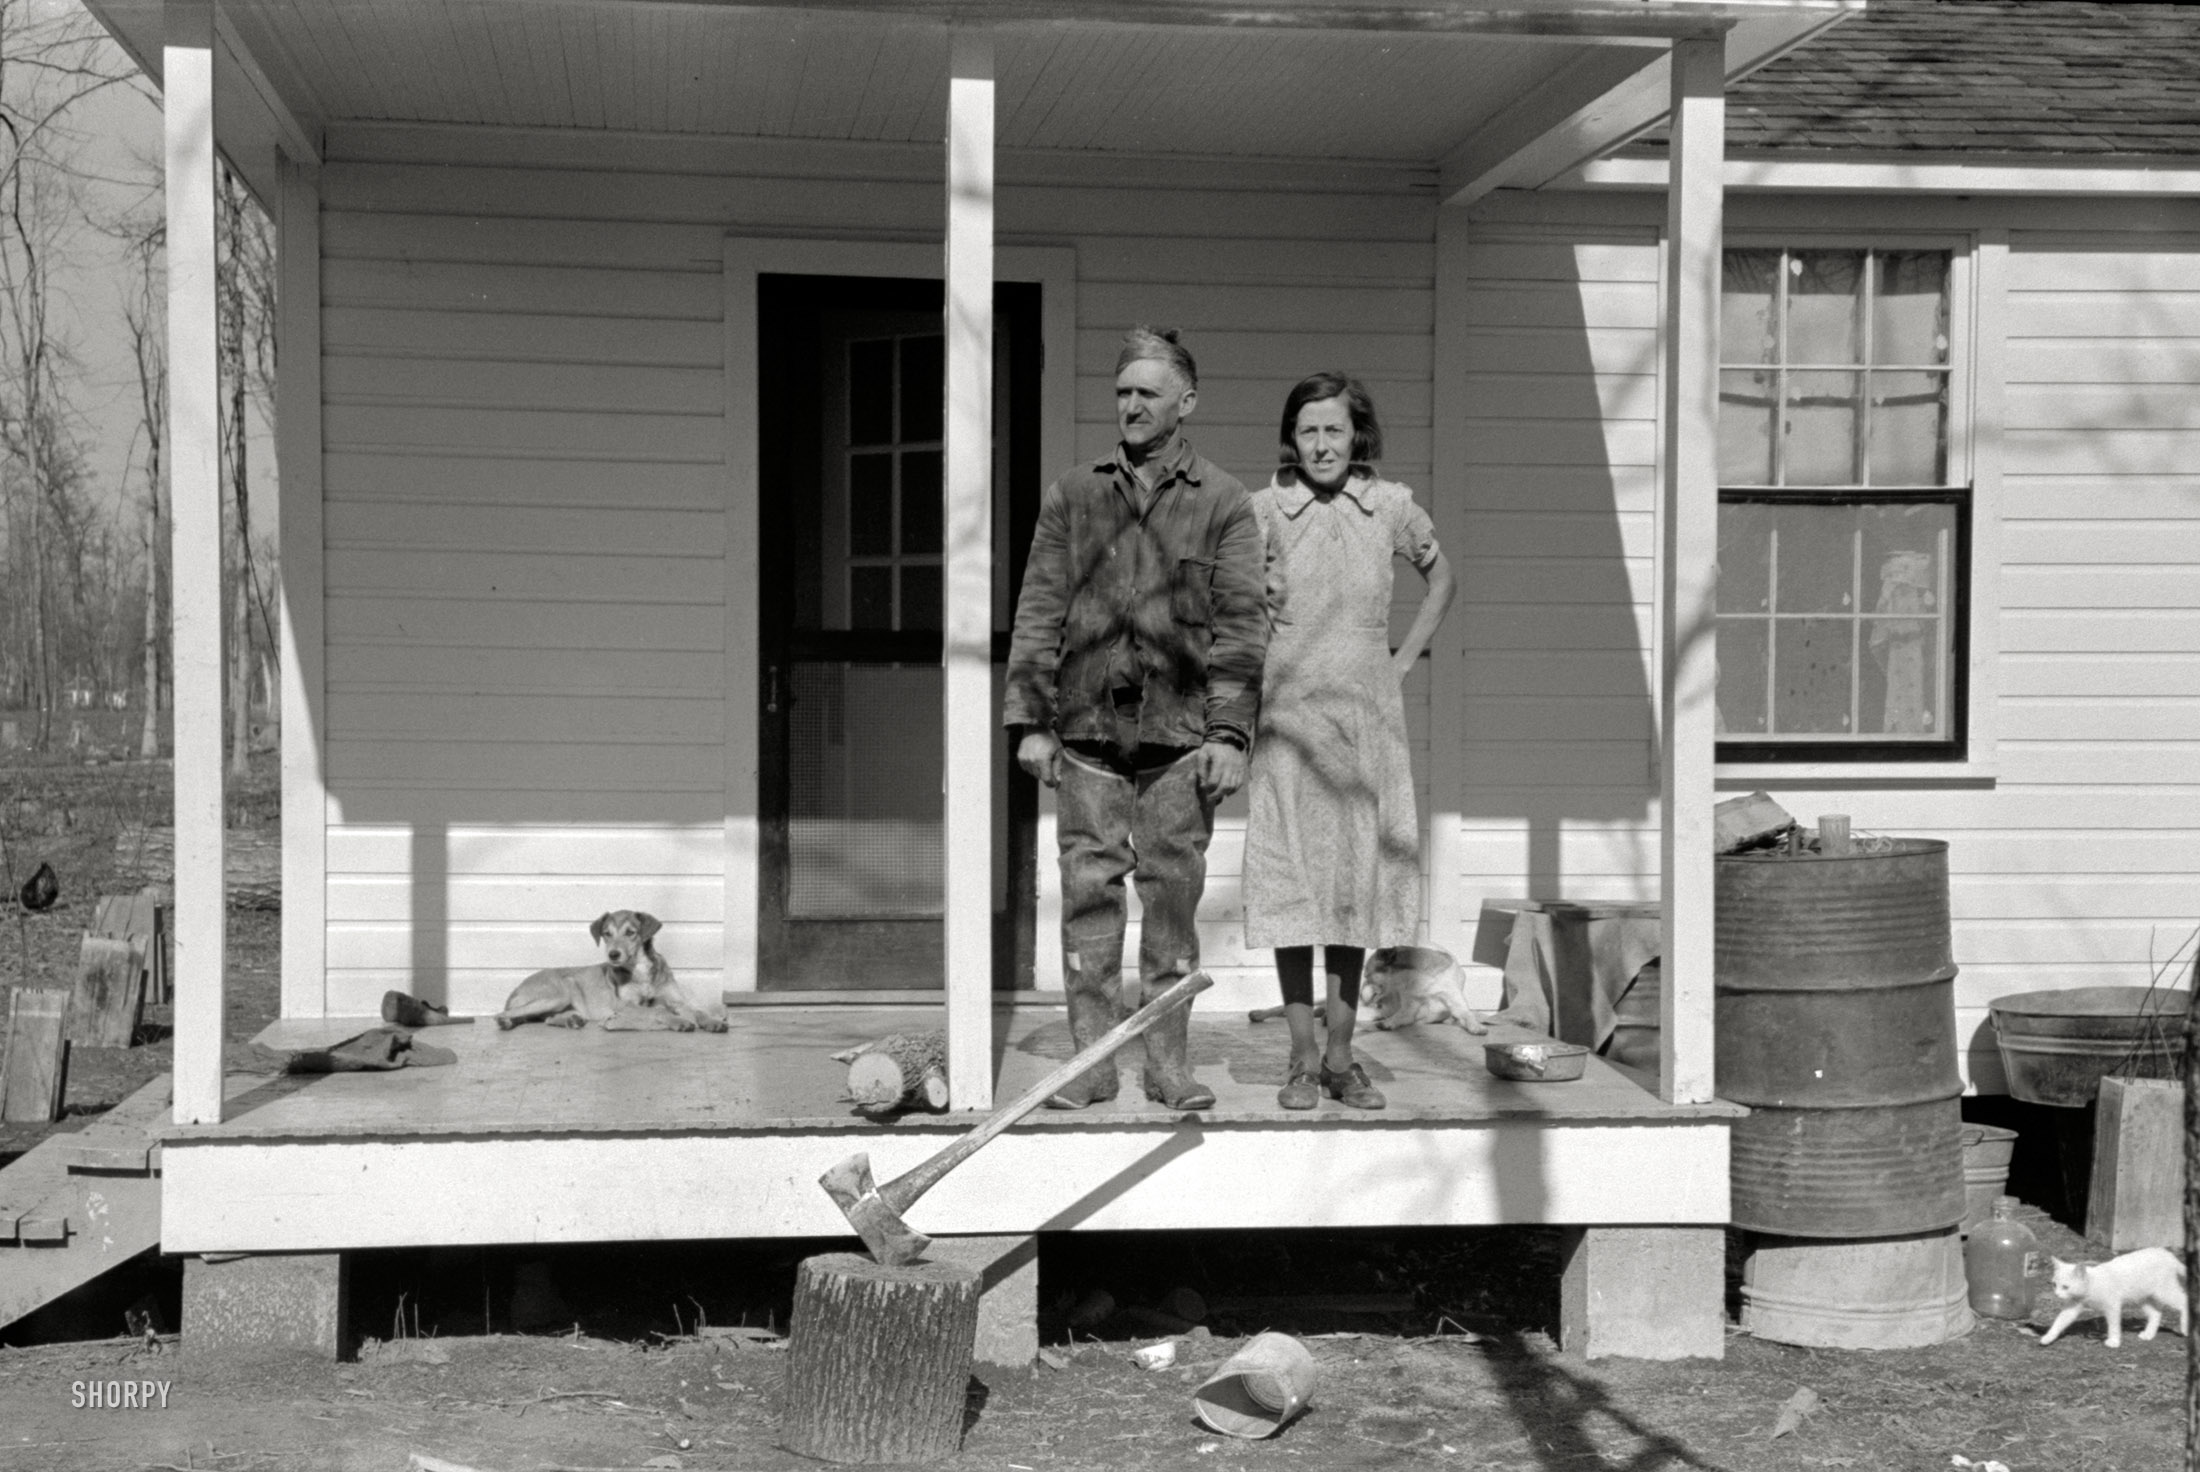 January 1939. Chicot Farms, Arkansas. "Husband and wife on porch of farm house." Photo by Russell Lee, Farm Security Administration. View full size.